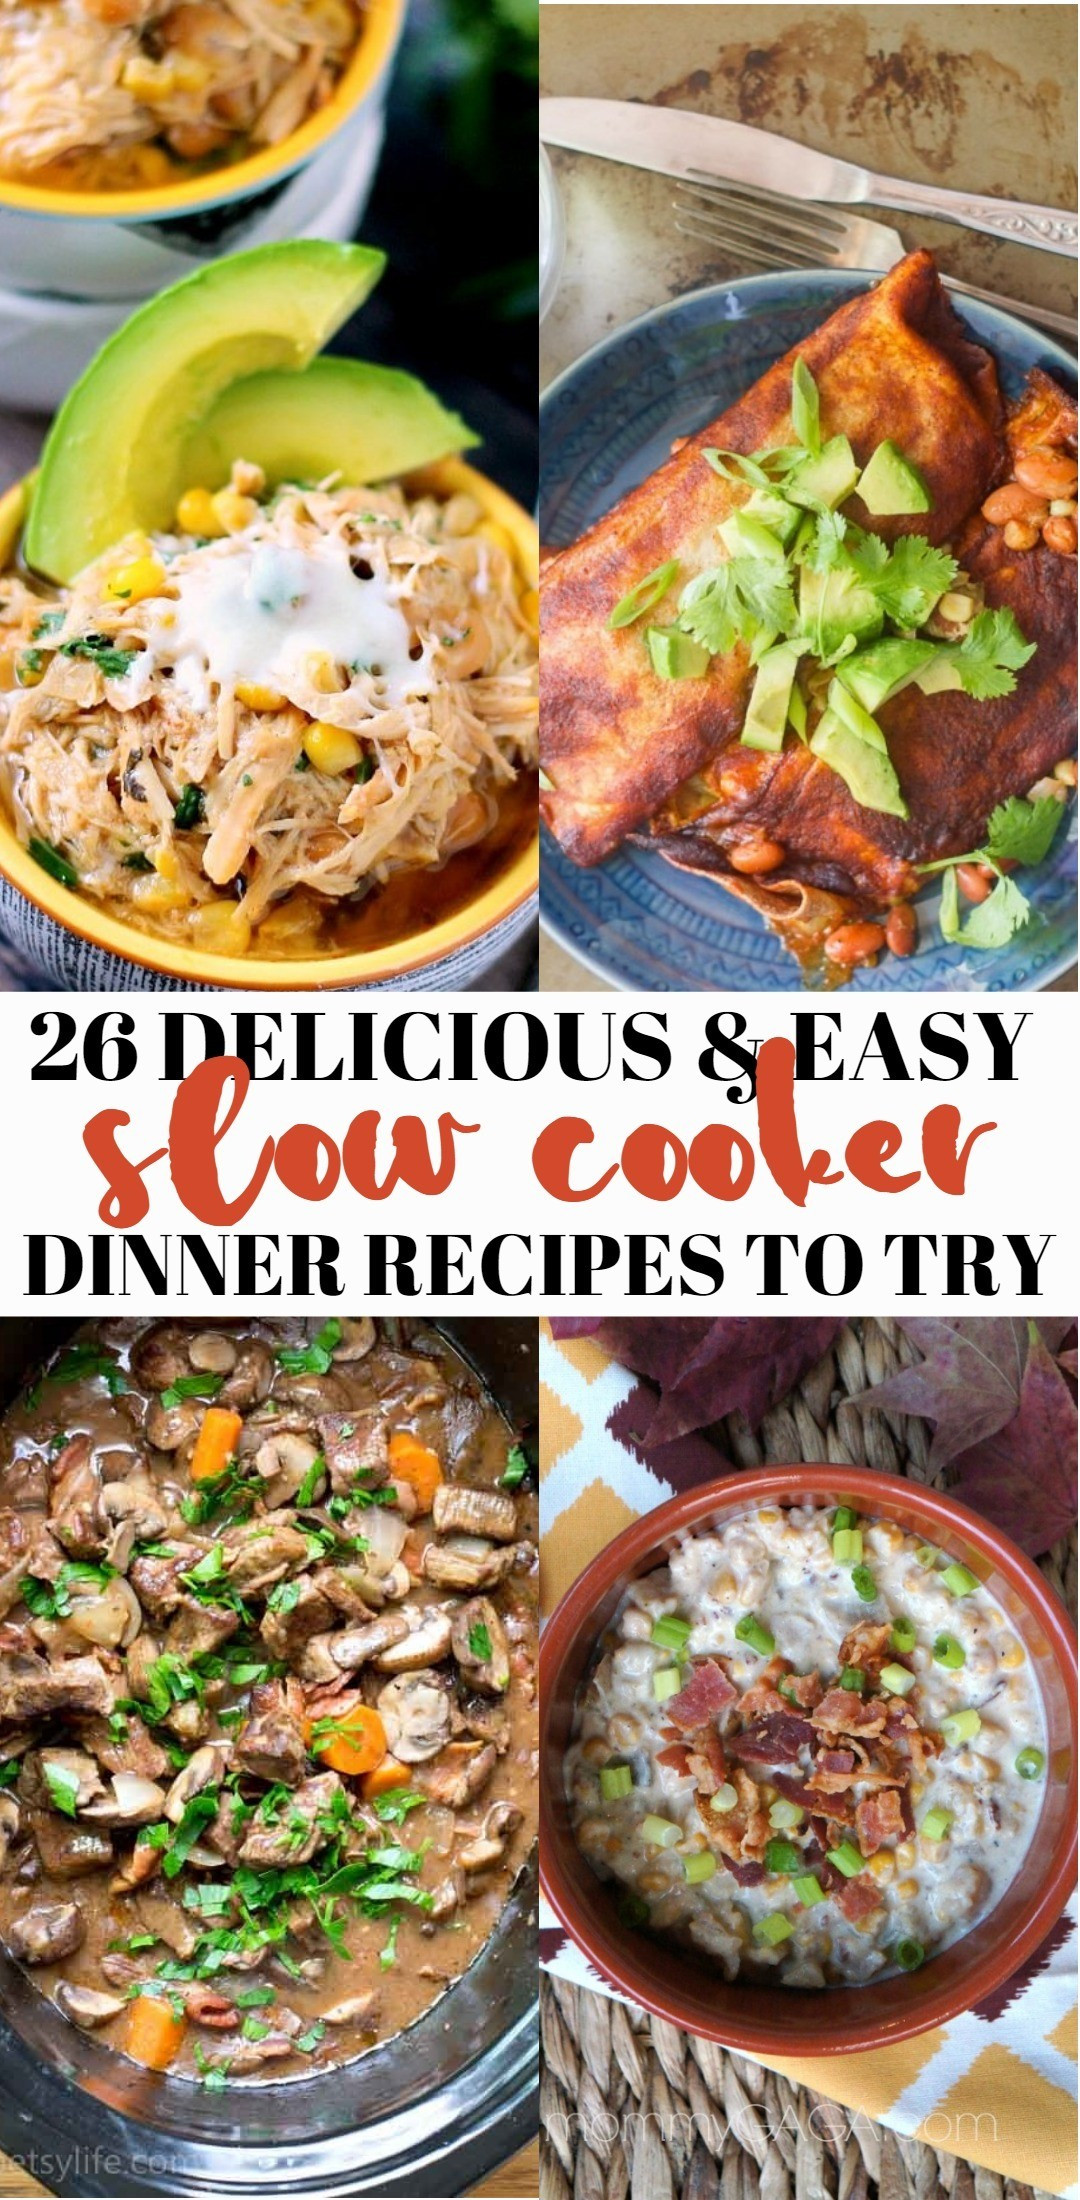 Delicious Dinner Recipes
 26 Delicious and Easy Slow Cooker Dinner Recipes Your